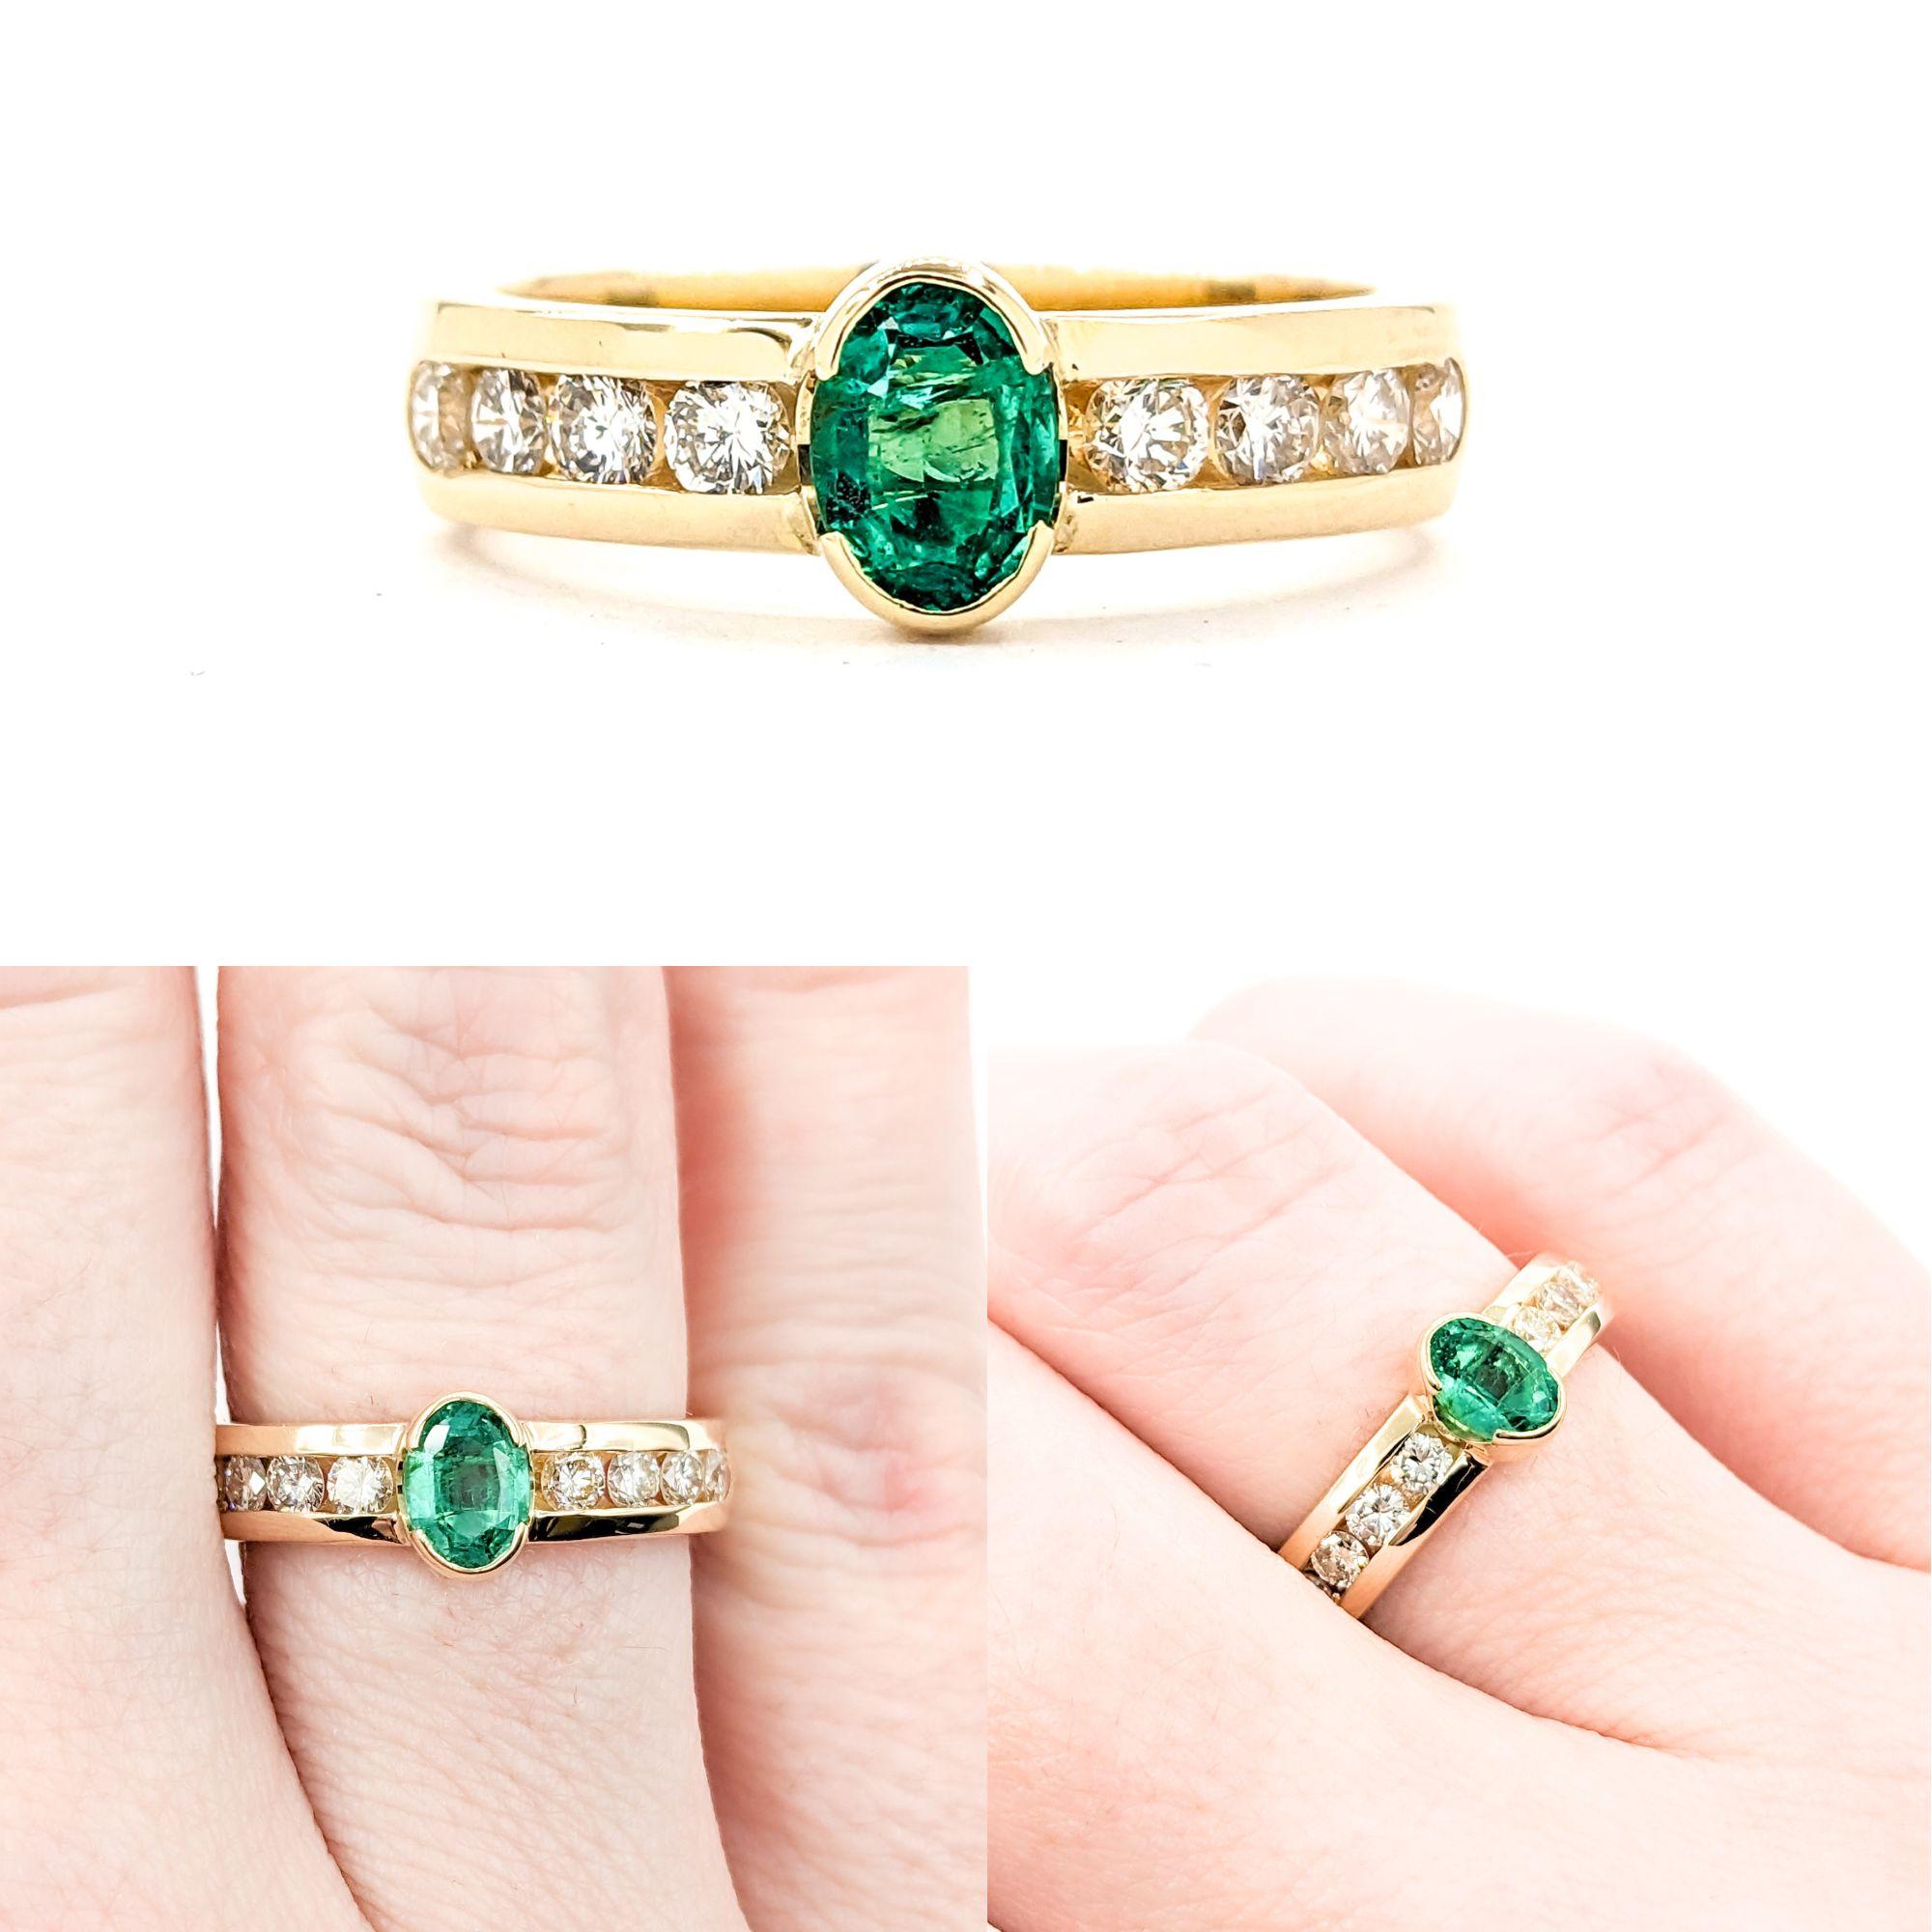 .50ct Emerald & .40ctw Diamond Ring In Yellow Gold

Introducing this stunning ring crafted in 14kt yellow gold. It showcases a .50ct Emerald centerpiece, beautifully complemented by .40ctw round diamonds. These diamonds, sparkling with SI clarity